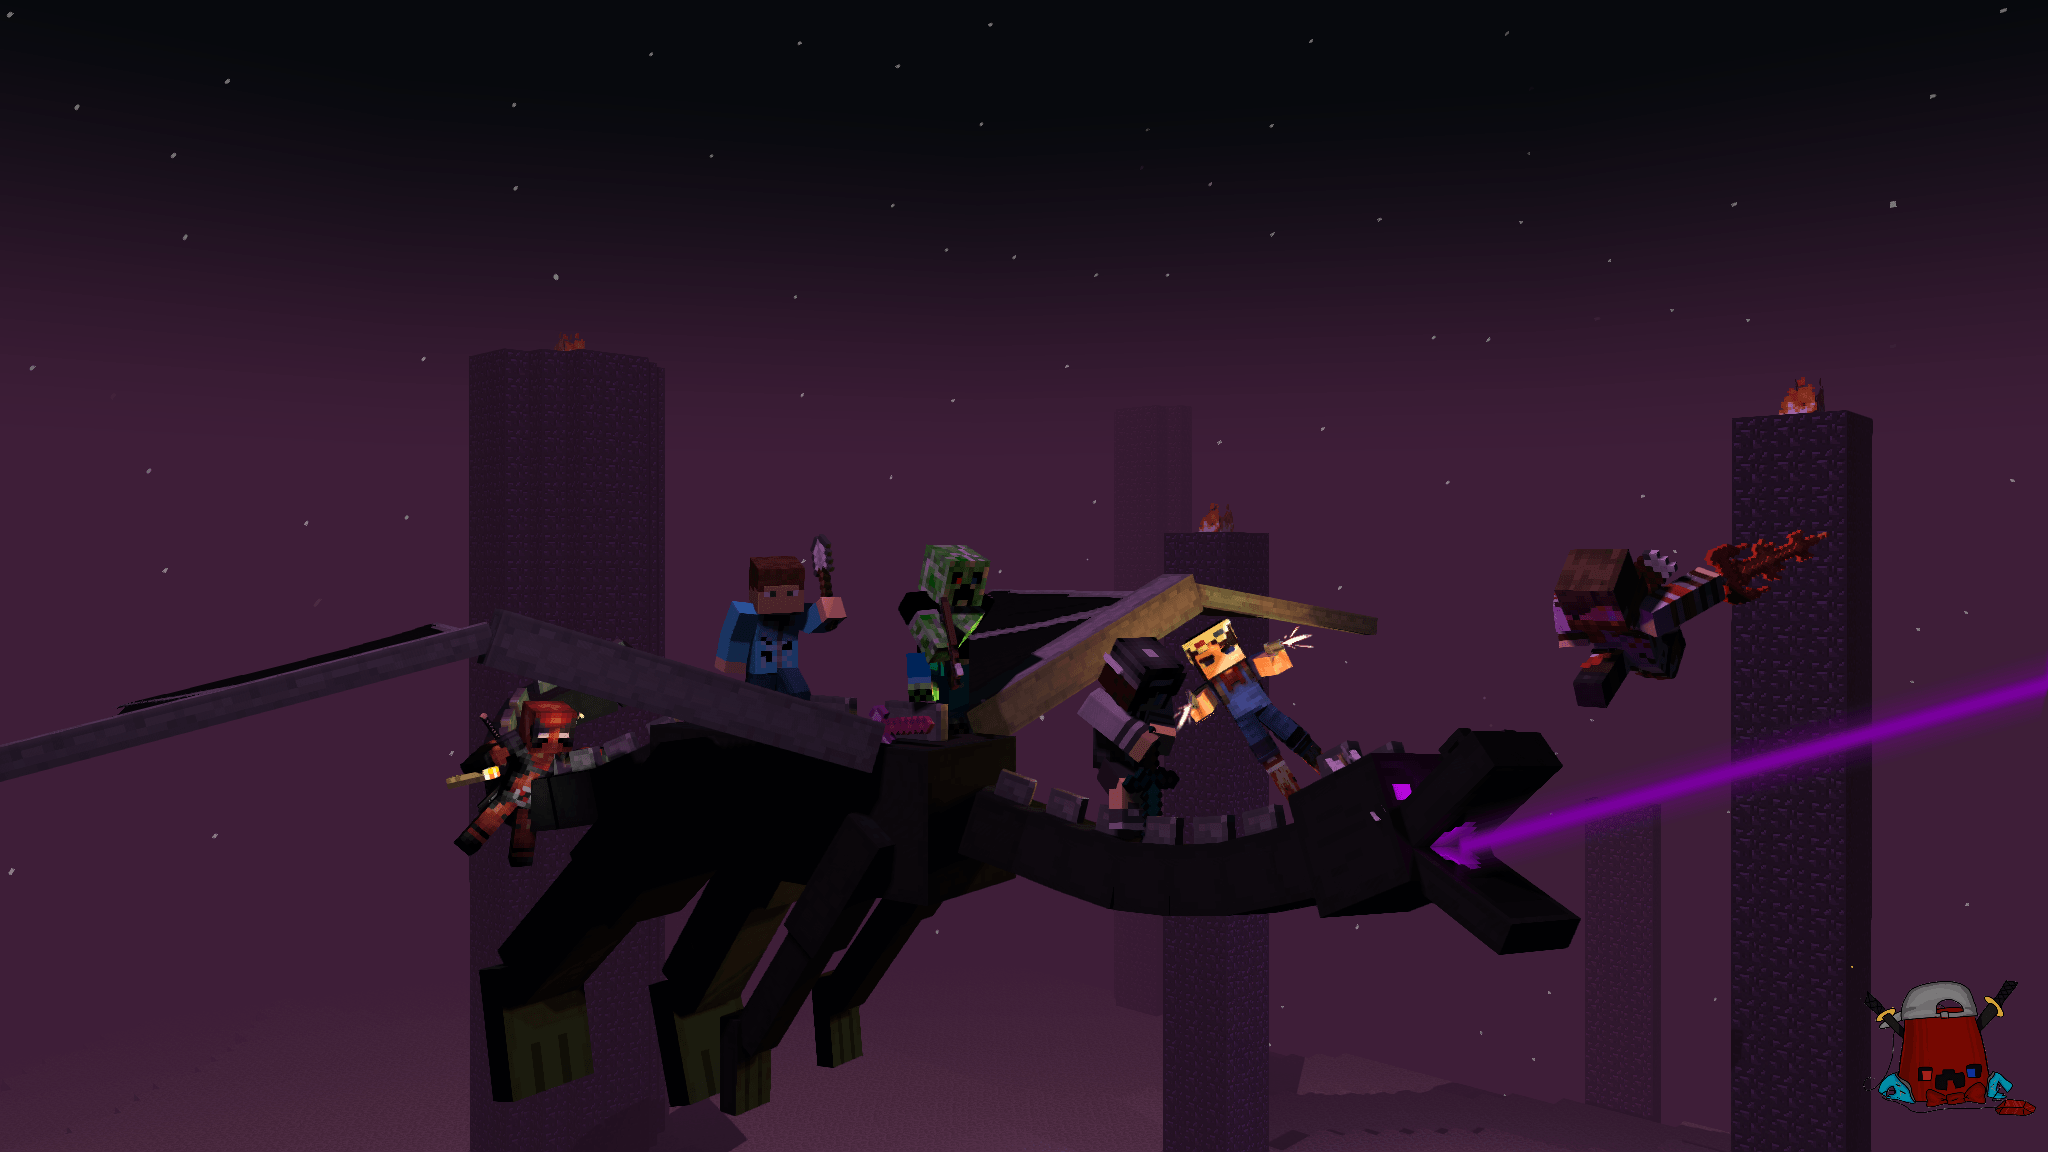 That moment when you beat the Ender Dragon for the first time   Minecraft wallpaper Minecraft posters Minecraft pictures